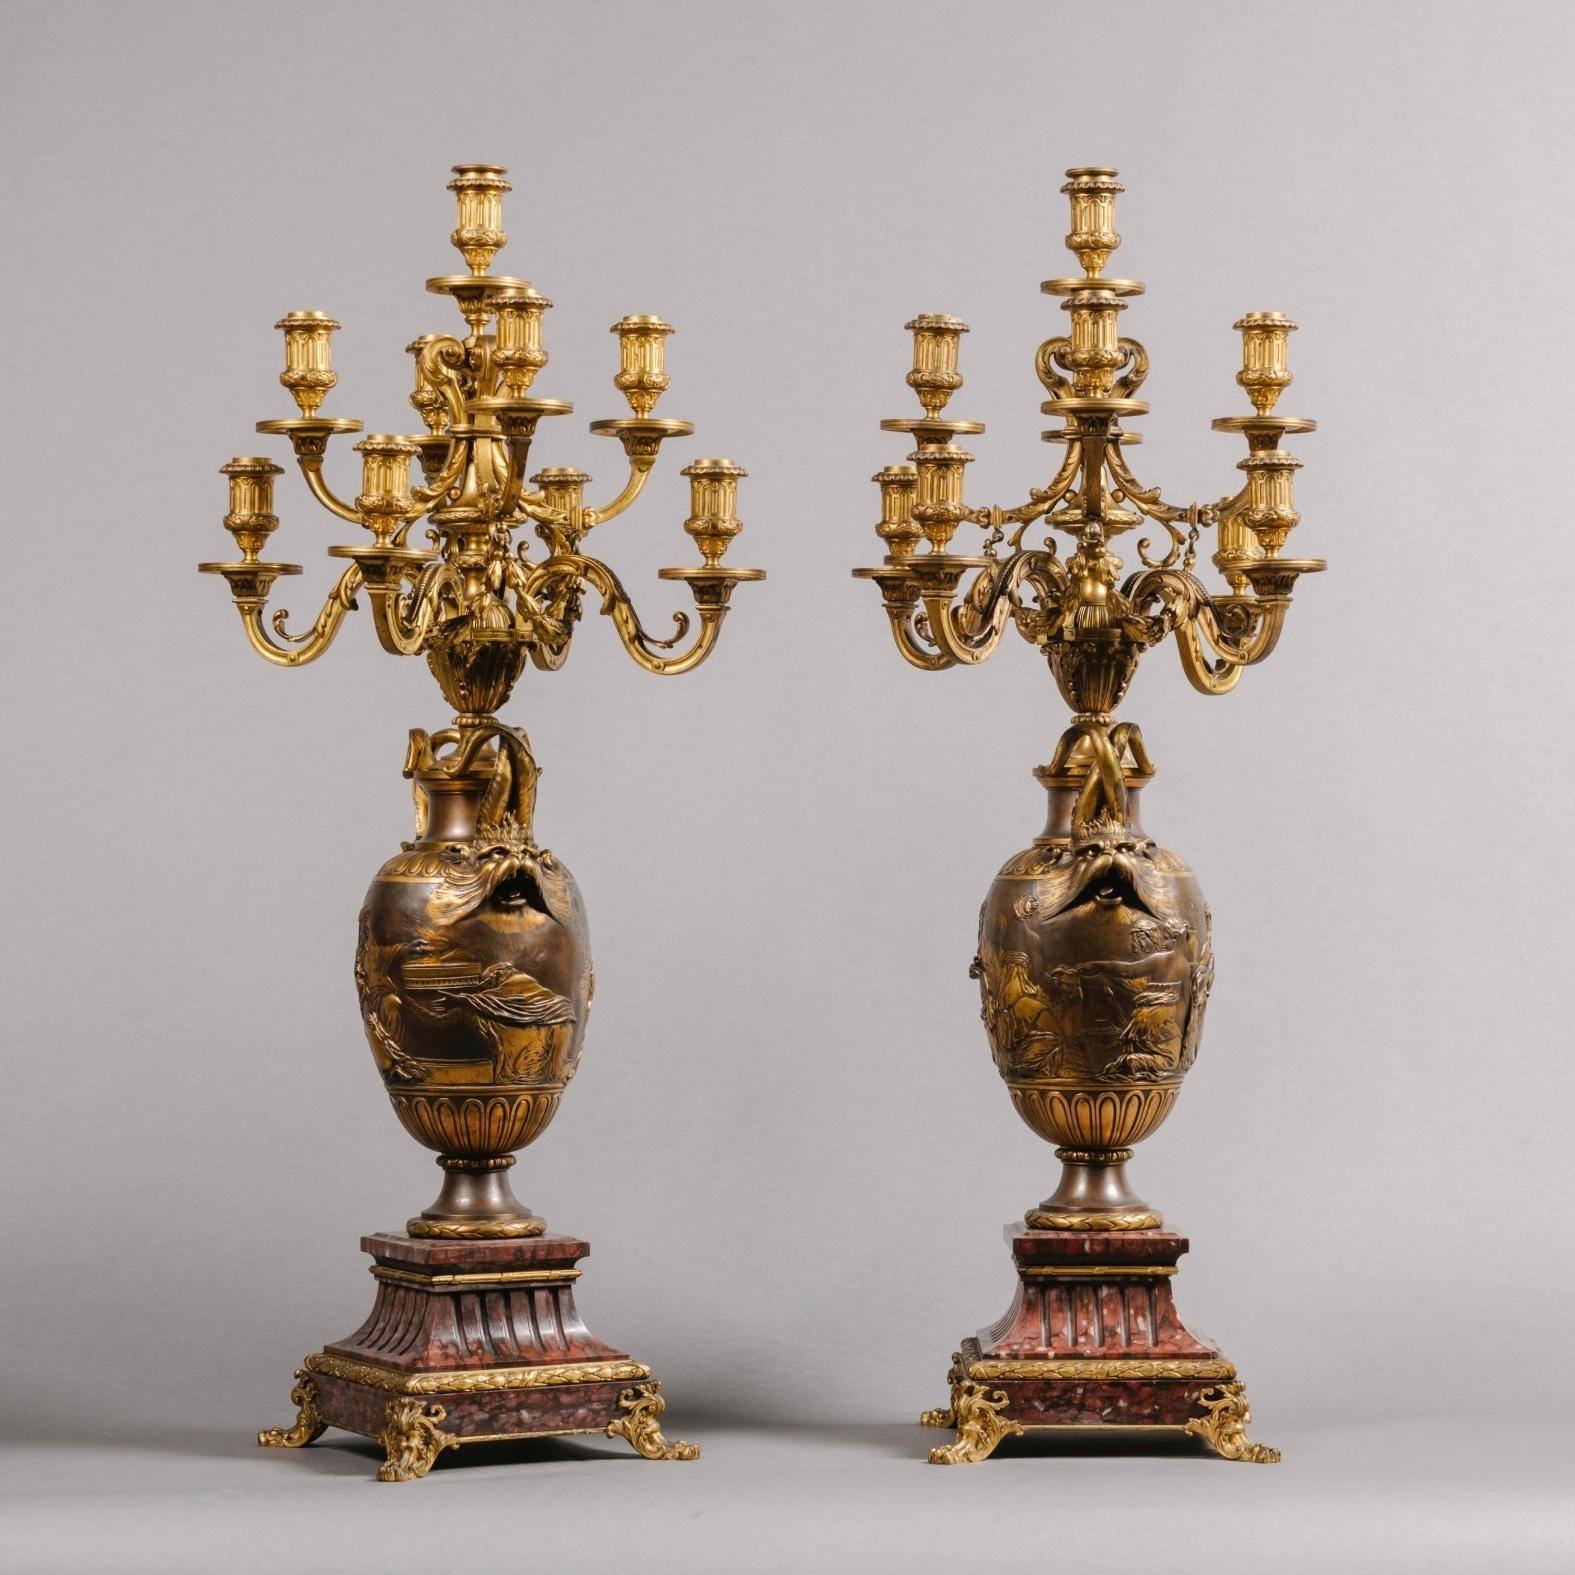 Neoclassical Revival Pair of Patinated Bronze Nine-Light Candelabra by Barbedienne For Sale